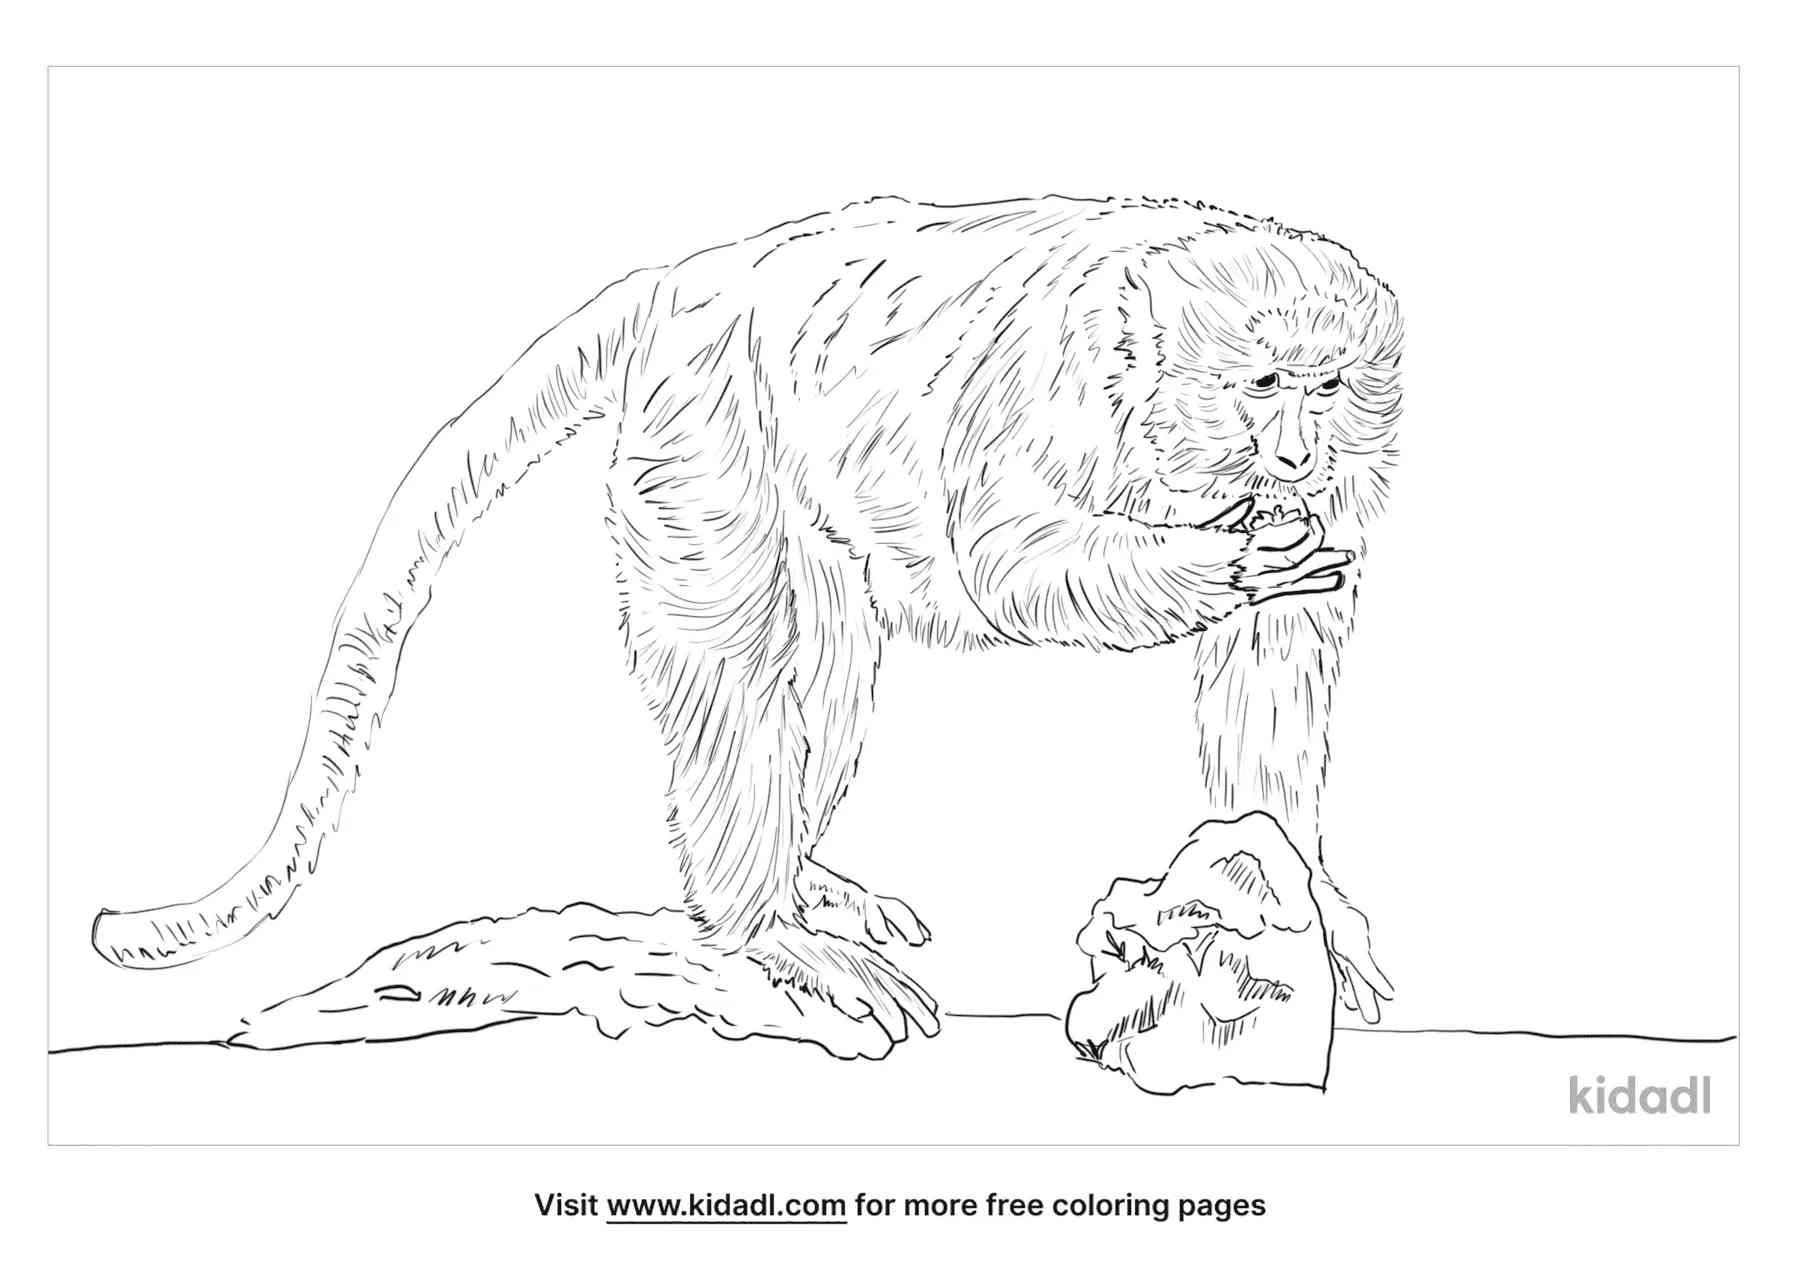 Crab Eating Macaque coloring pages for kids.